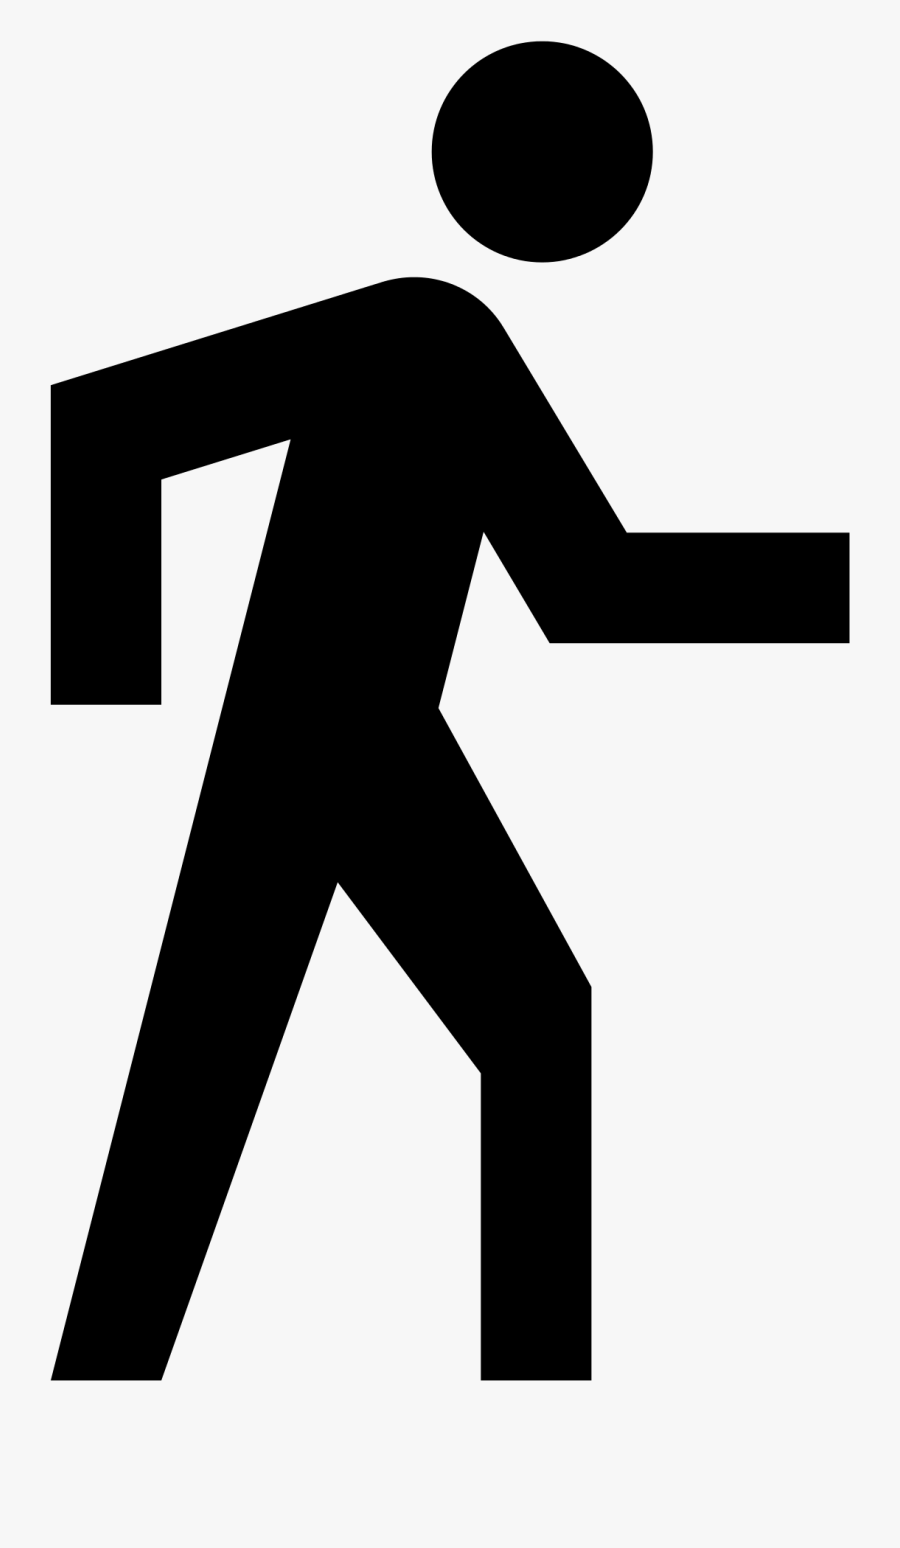 To School Png Black - Google Maps Walking Icon, Transparent Clipart